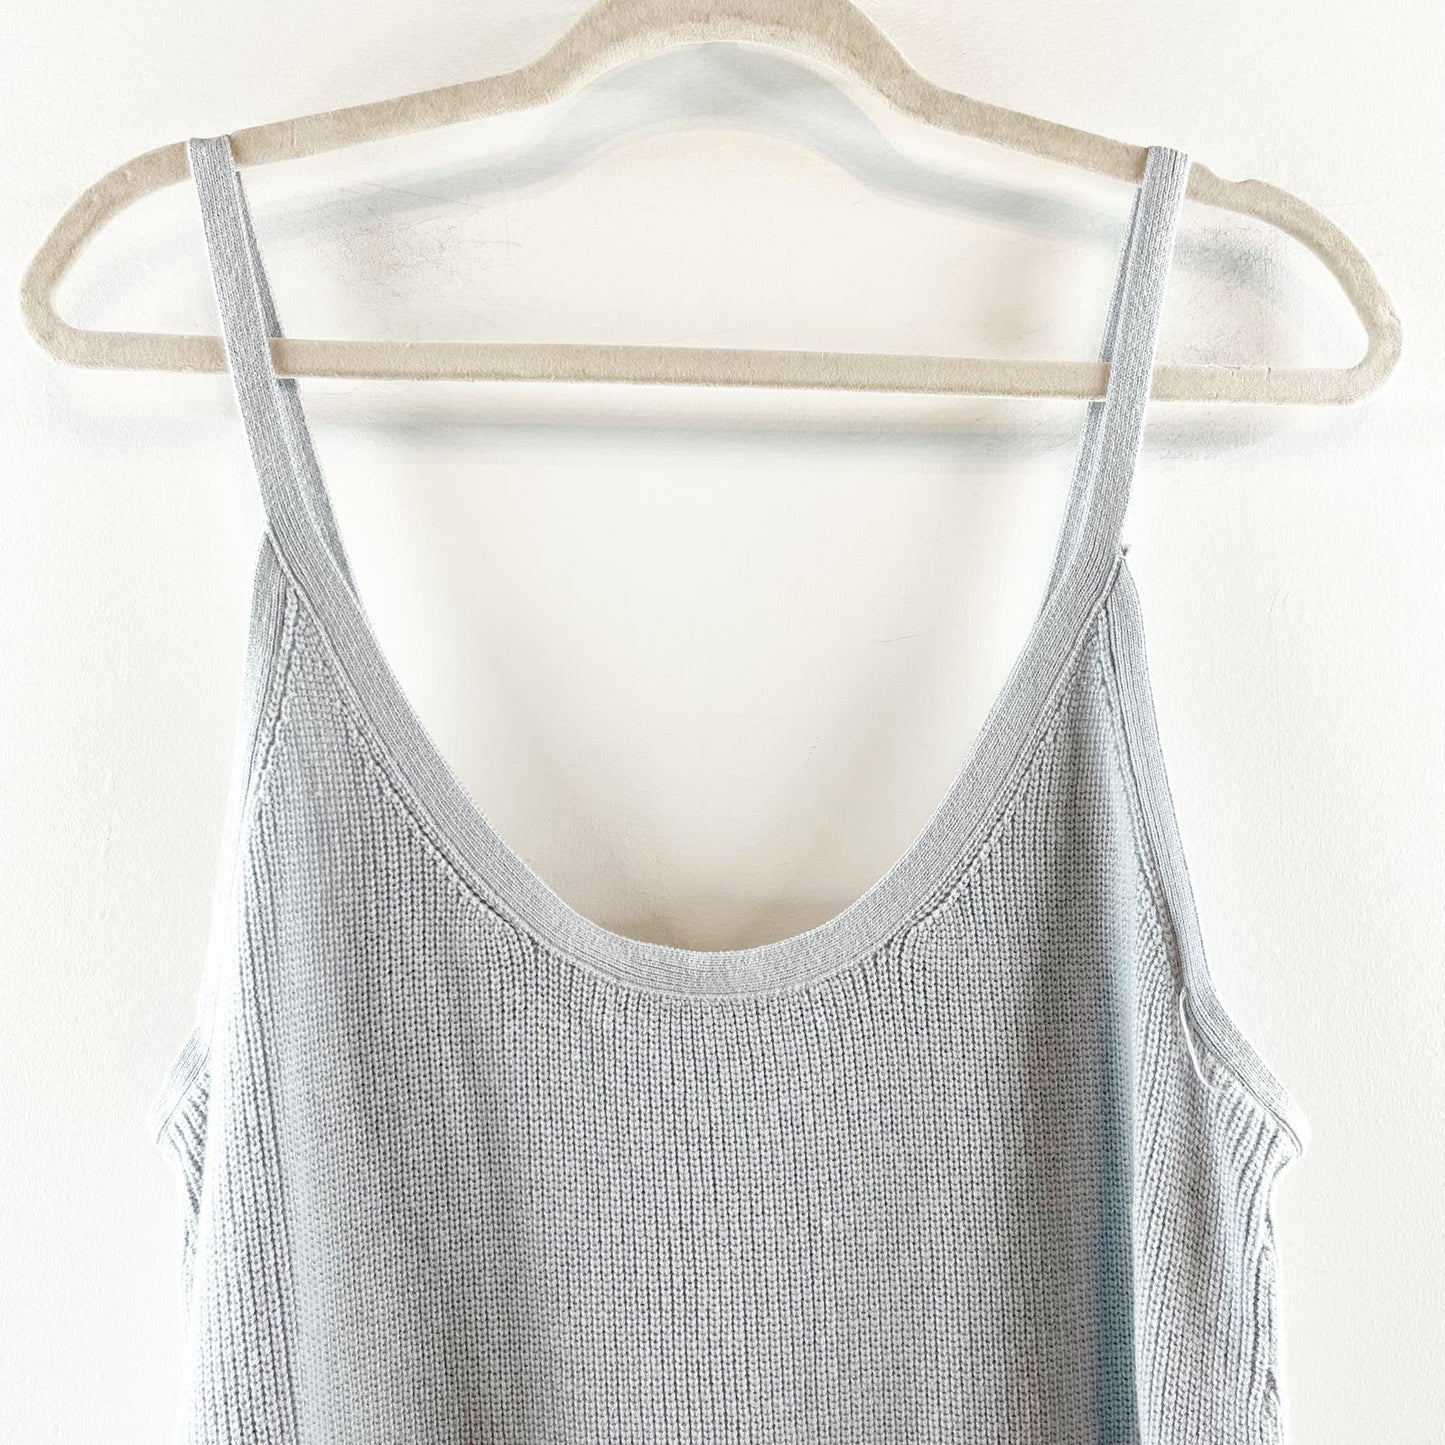 Abercrombie & Fitch Button Up Sweater Knit Tank Top Blue XL